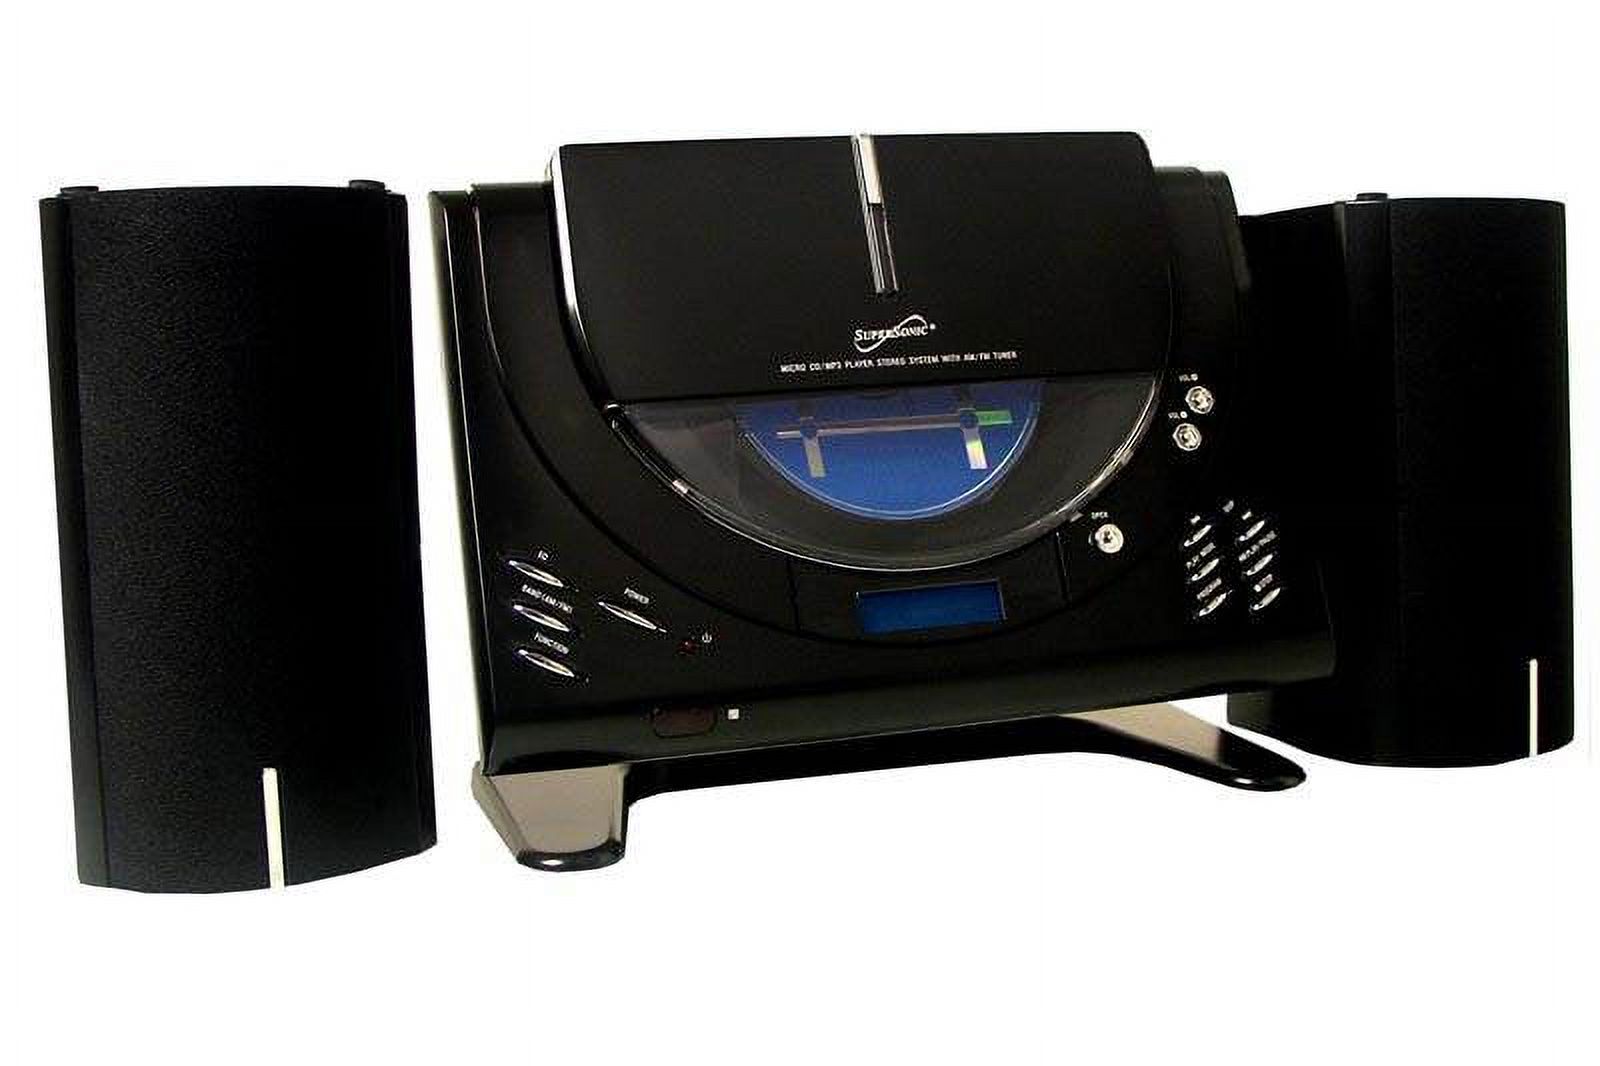 New SUPERSONIC SC-3399M Vertical Loading CD/MP3 Micro System AM/FM Radio SC-3399 - image 2 of 3